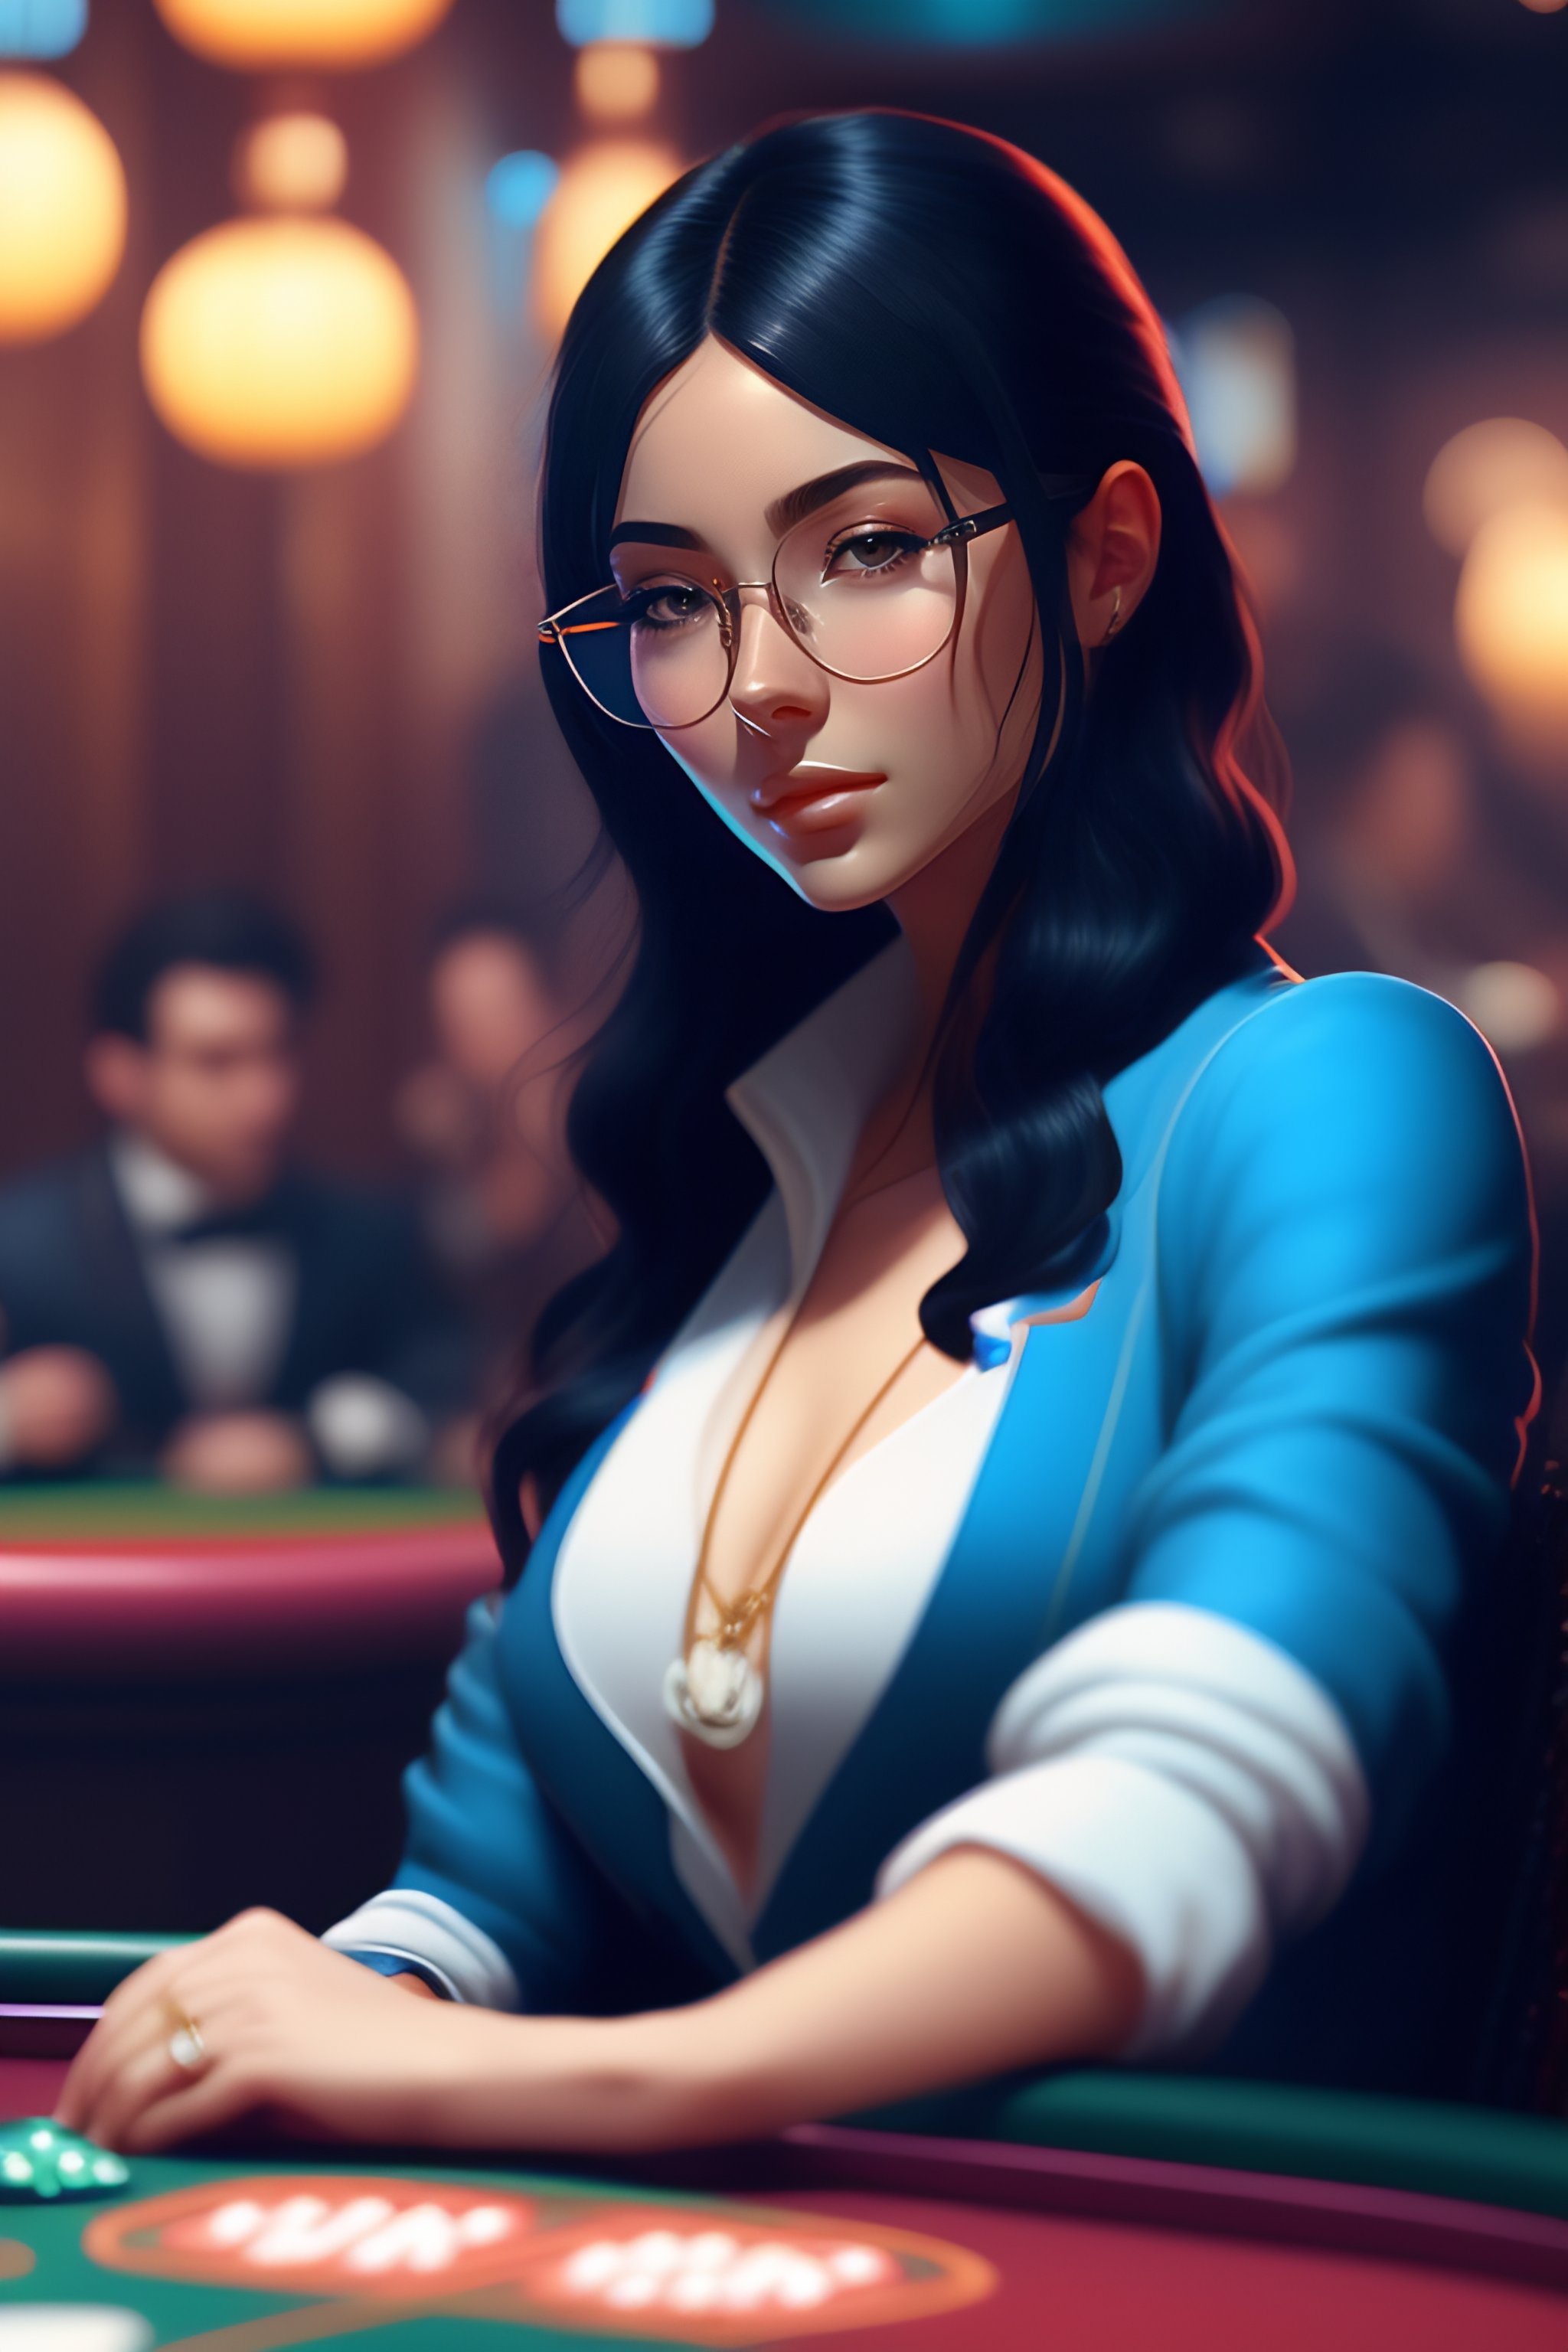 Lexica - glasses poker drinking tonic hair sweater black a with blue black casino c sitting a inside by table in gin Cute background girl wayfarer